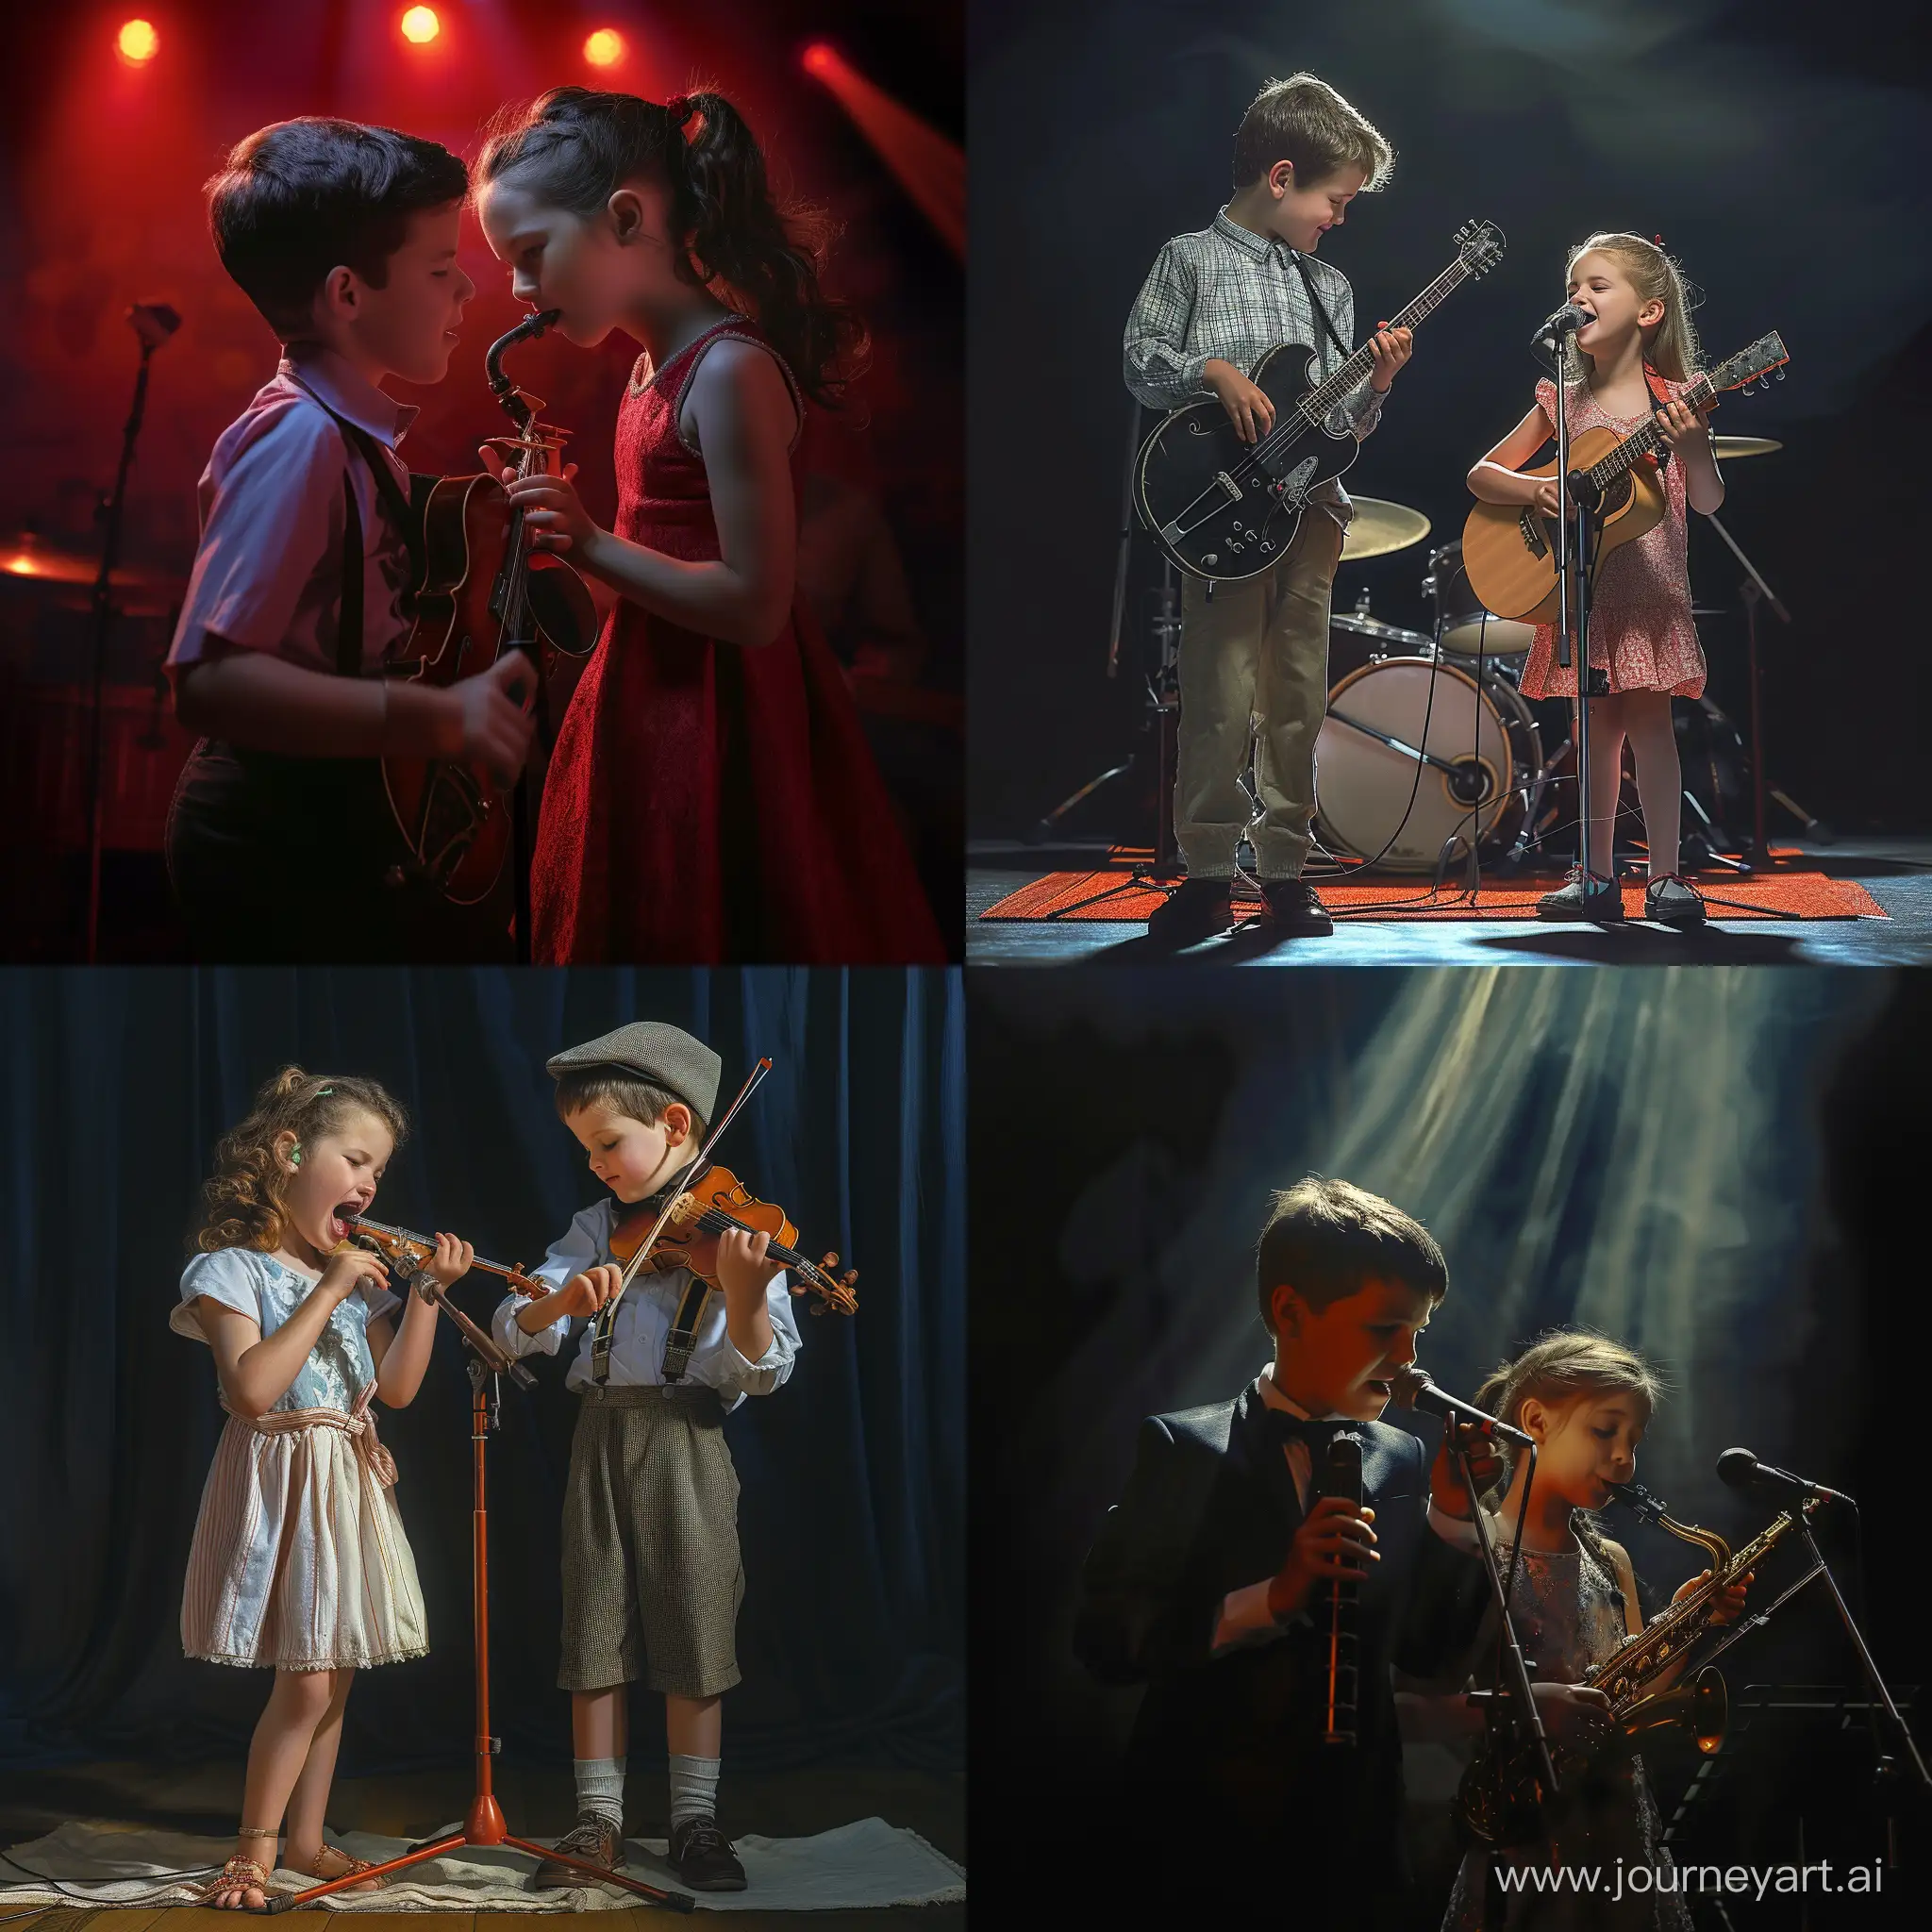 Children-Performing-Music-on-Stage-Captured-in-Hyperrealistic-Photography